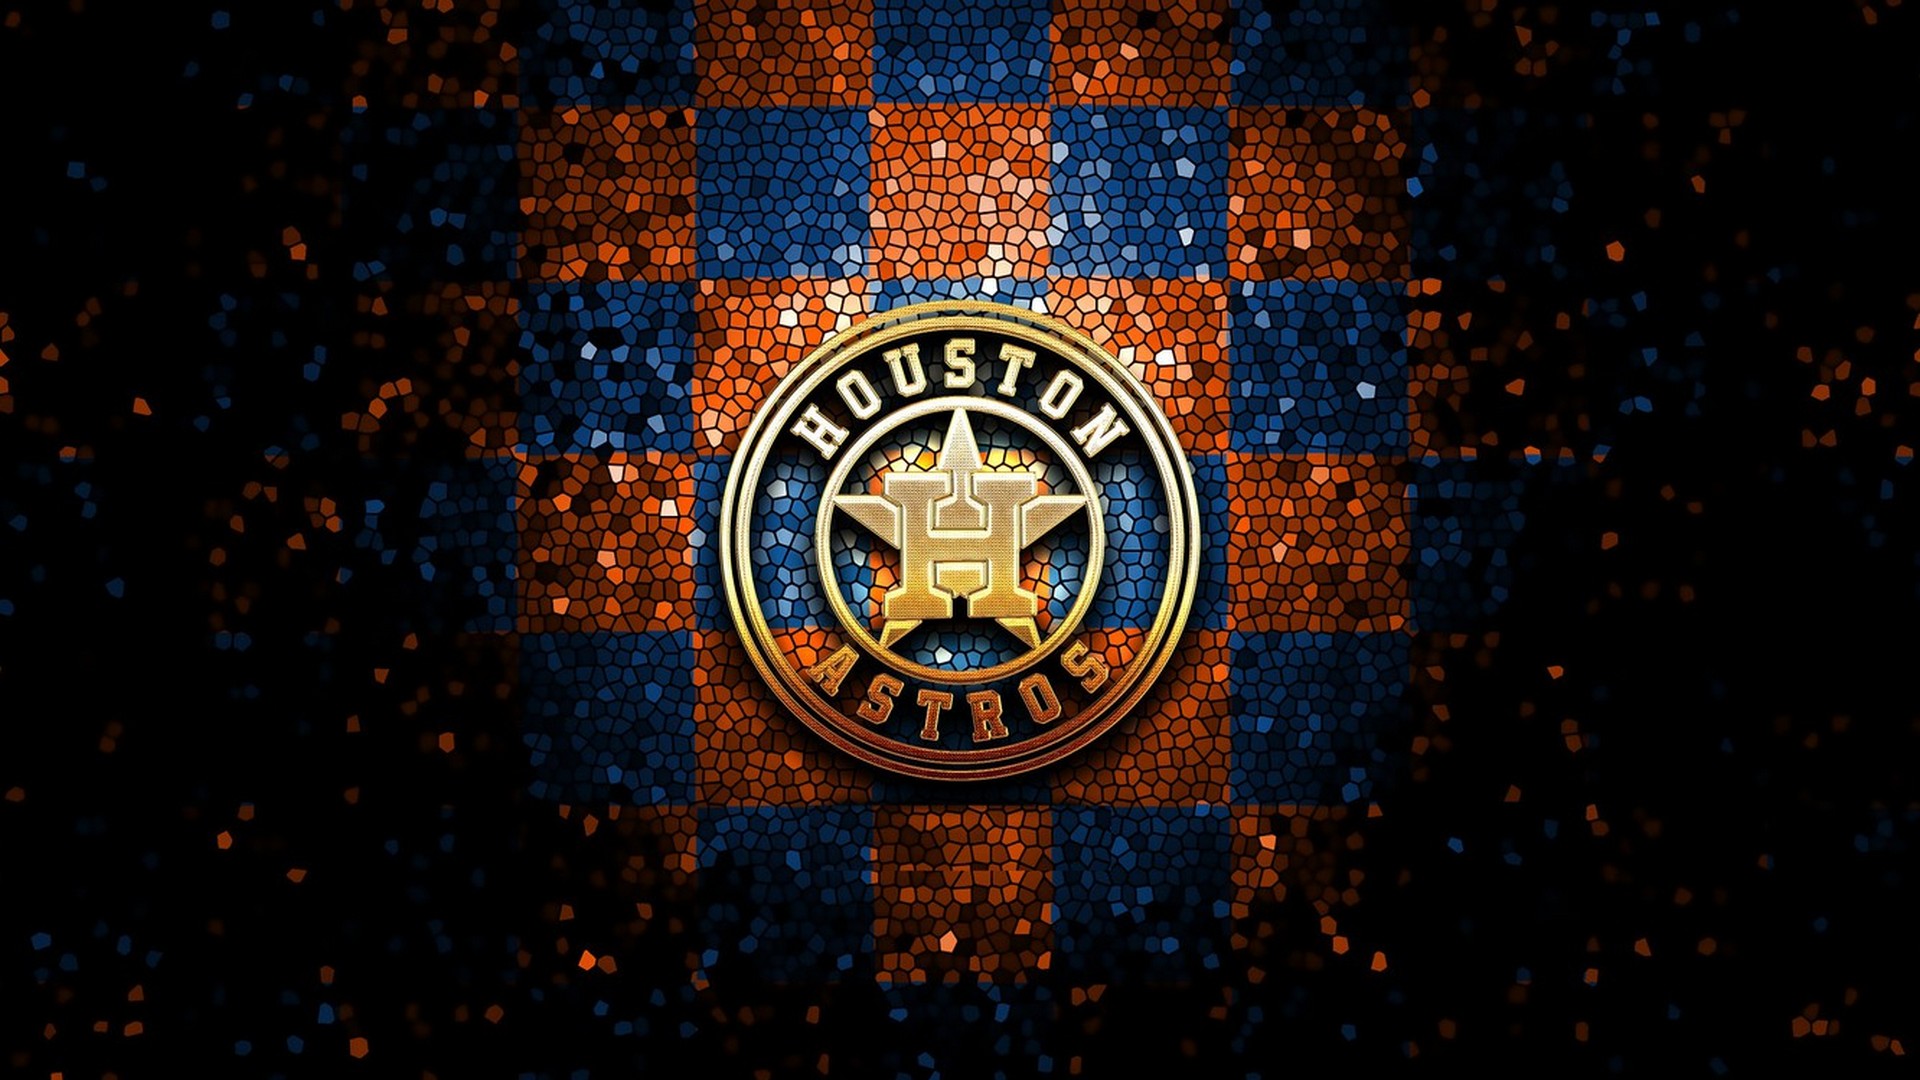 Wallpapers HD Houston Astros with high-resolution 1920x1080 pixel. You can use this wallpaper for Mac Desktop Wallpaper, Laptop Screensavers, Android Wallpapers, Tablet or iPhone Home Screen and another mobile phone device